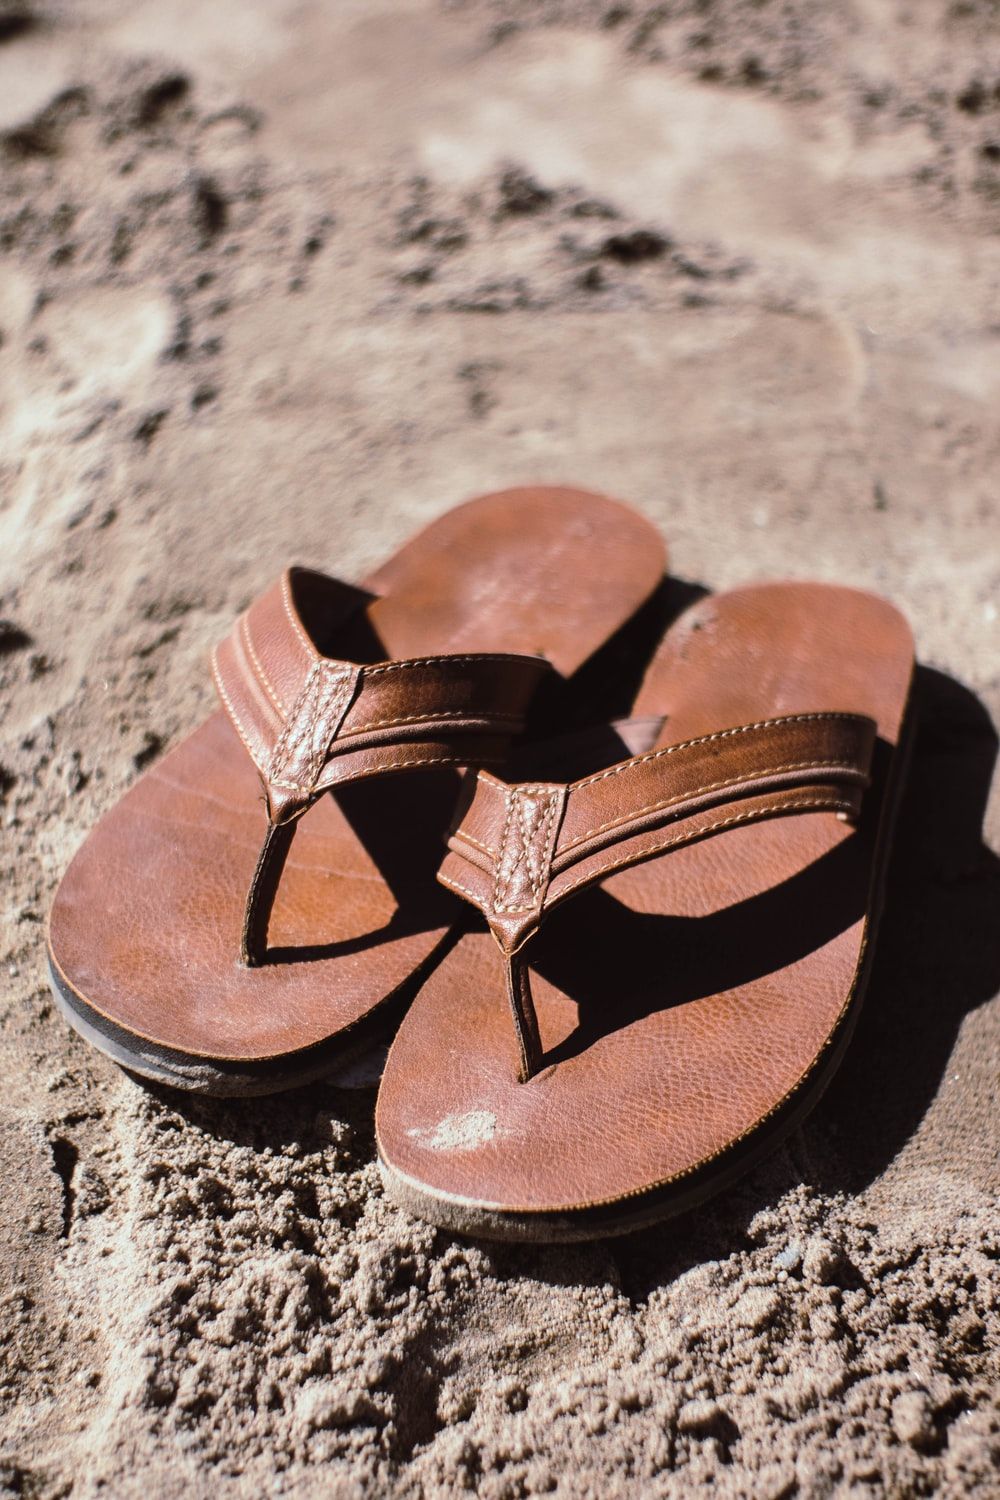 Sandal Picture. Download Free Image